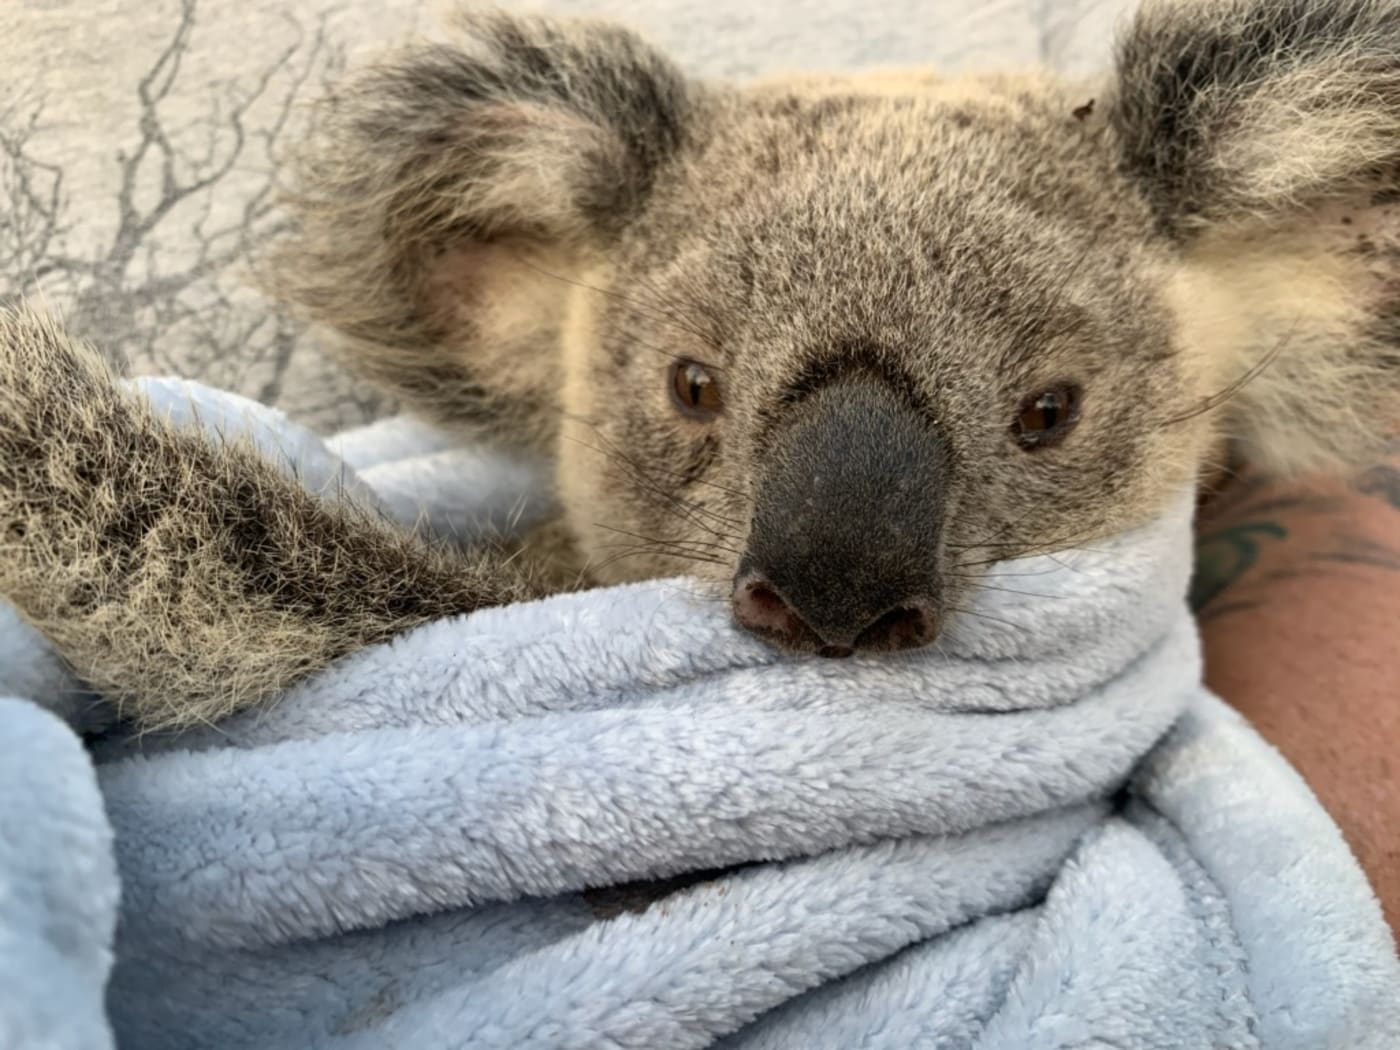 Maryanne the koala wrapped in a blanket

- 

WWF-Australia has deployed emergency funds for immediate wildlife rescue, care and recovery. We are providing support to the RSPCA Queensland, the leading wildlife care facility during the recent bushfires in Queensland to enable urgent treatment and ongoing care for the huge influx of injured wildlife, in particular koalas.